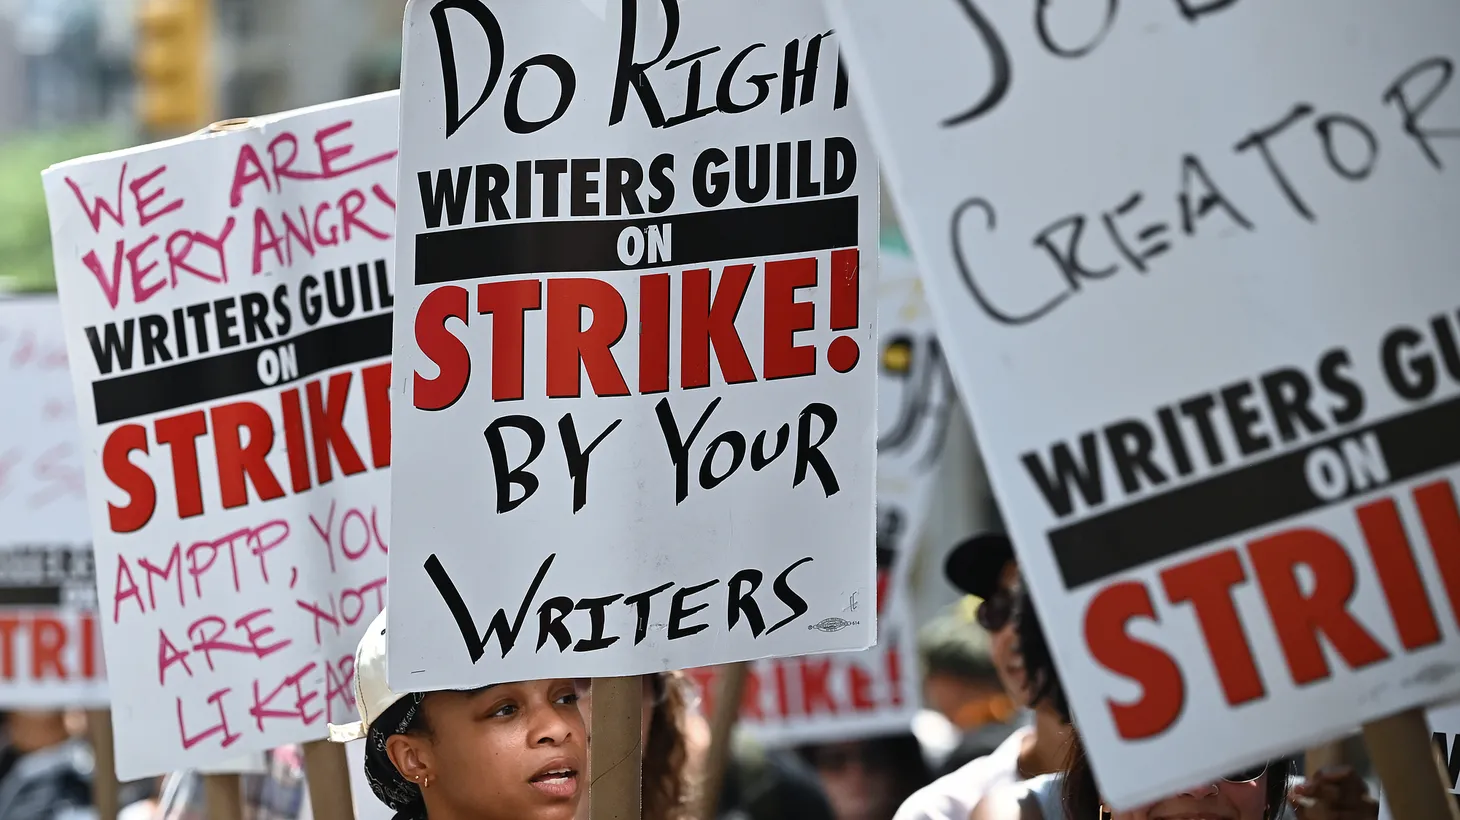 Members of the Writers Guild of America East picket outside the Warner Bros. Discovery offices in New York on July 13, 2023.